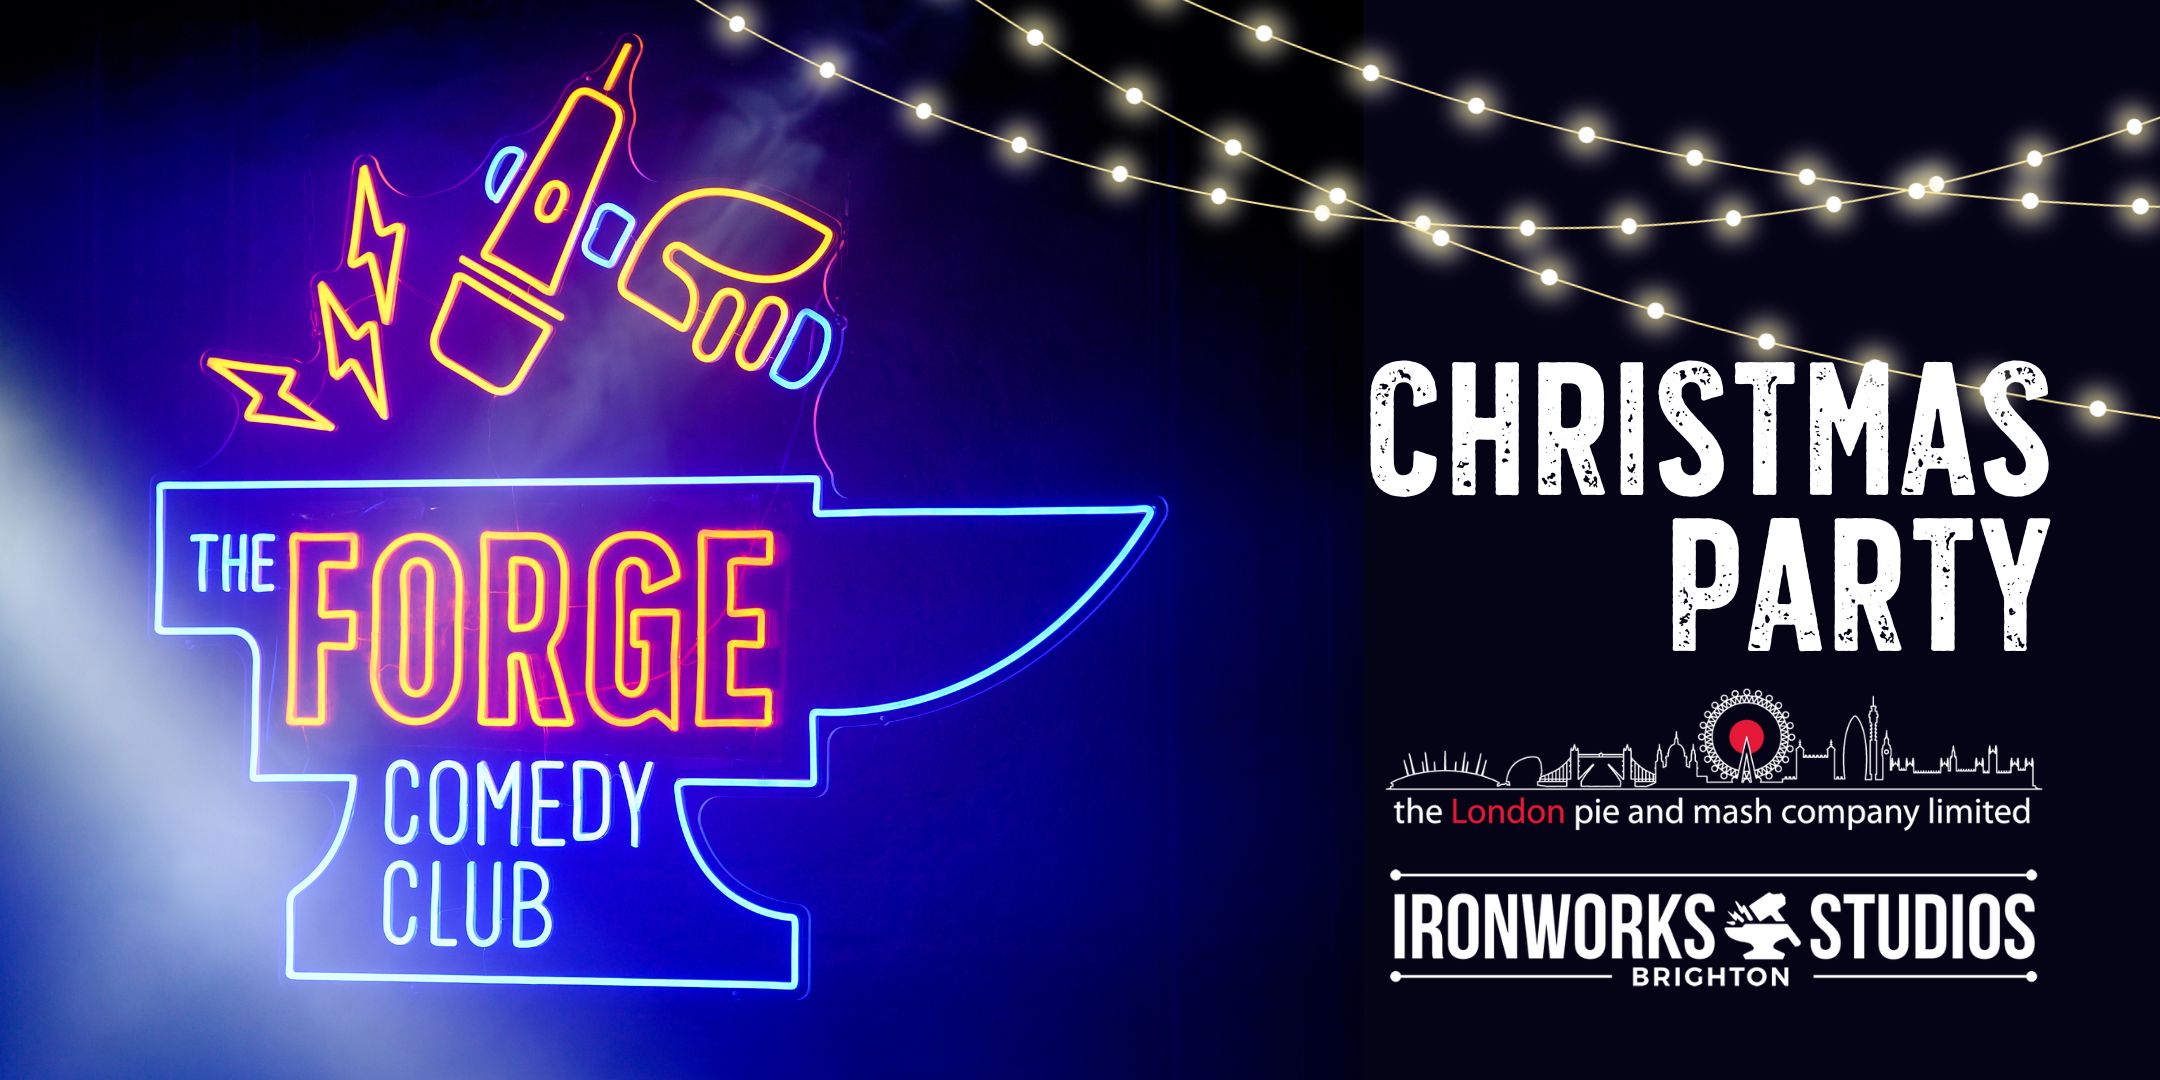 7th December: The Forge Comedy Club Christmas Party